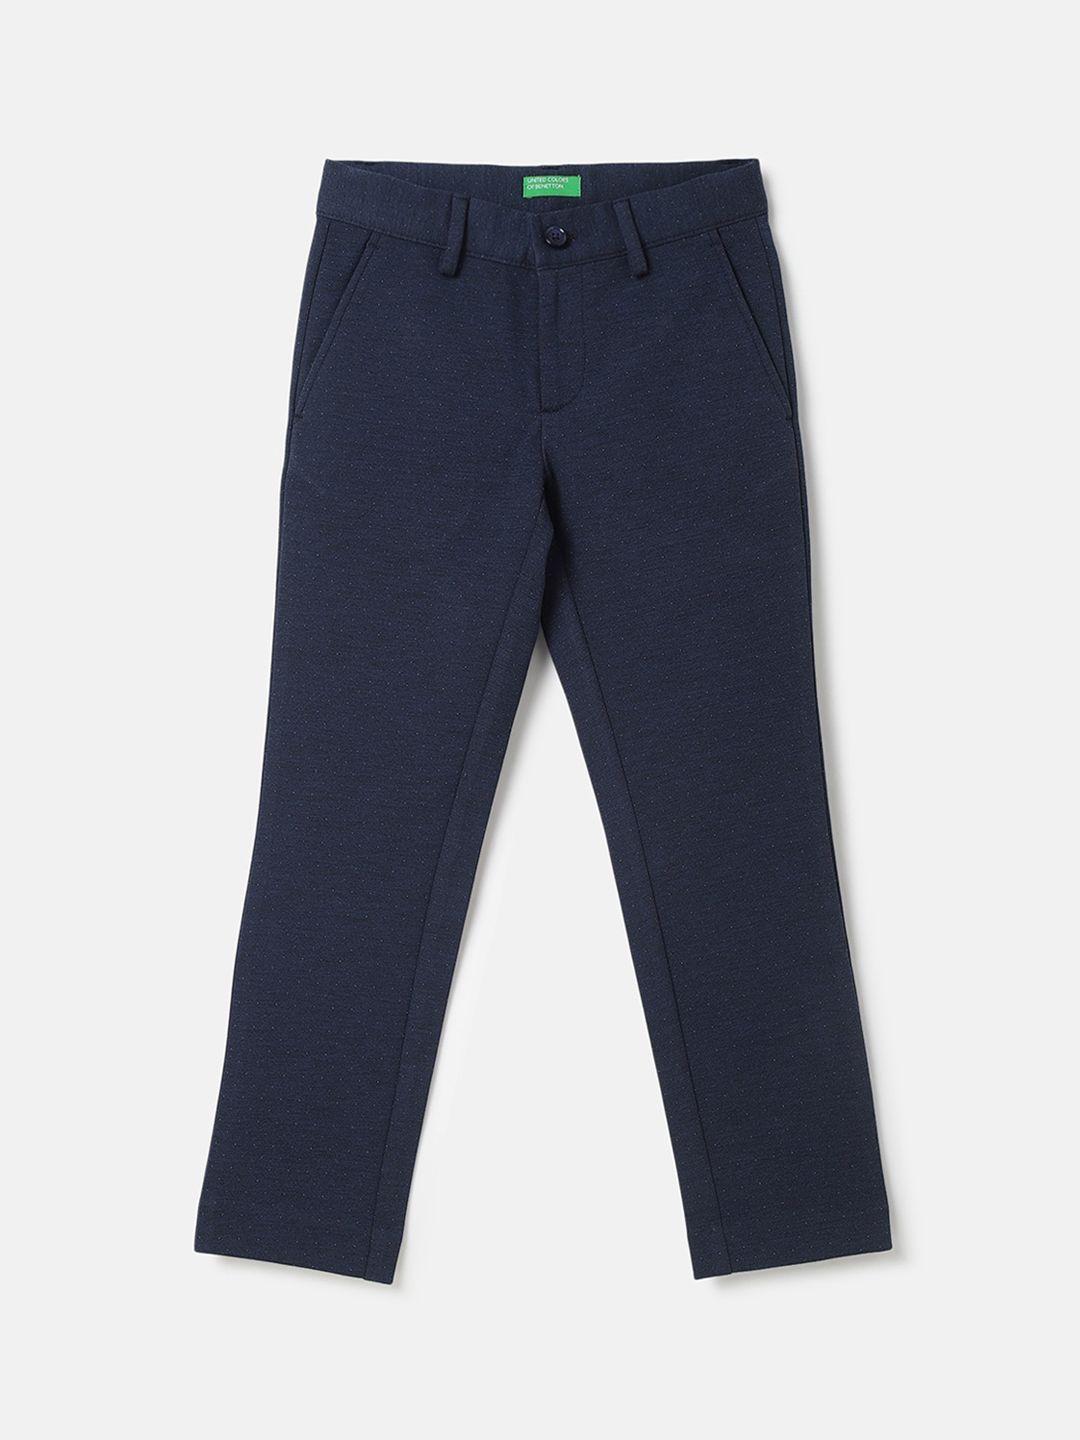 United Colors of Benetton Boys Textured Cotton Regular Fit Trousers